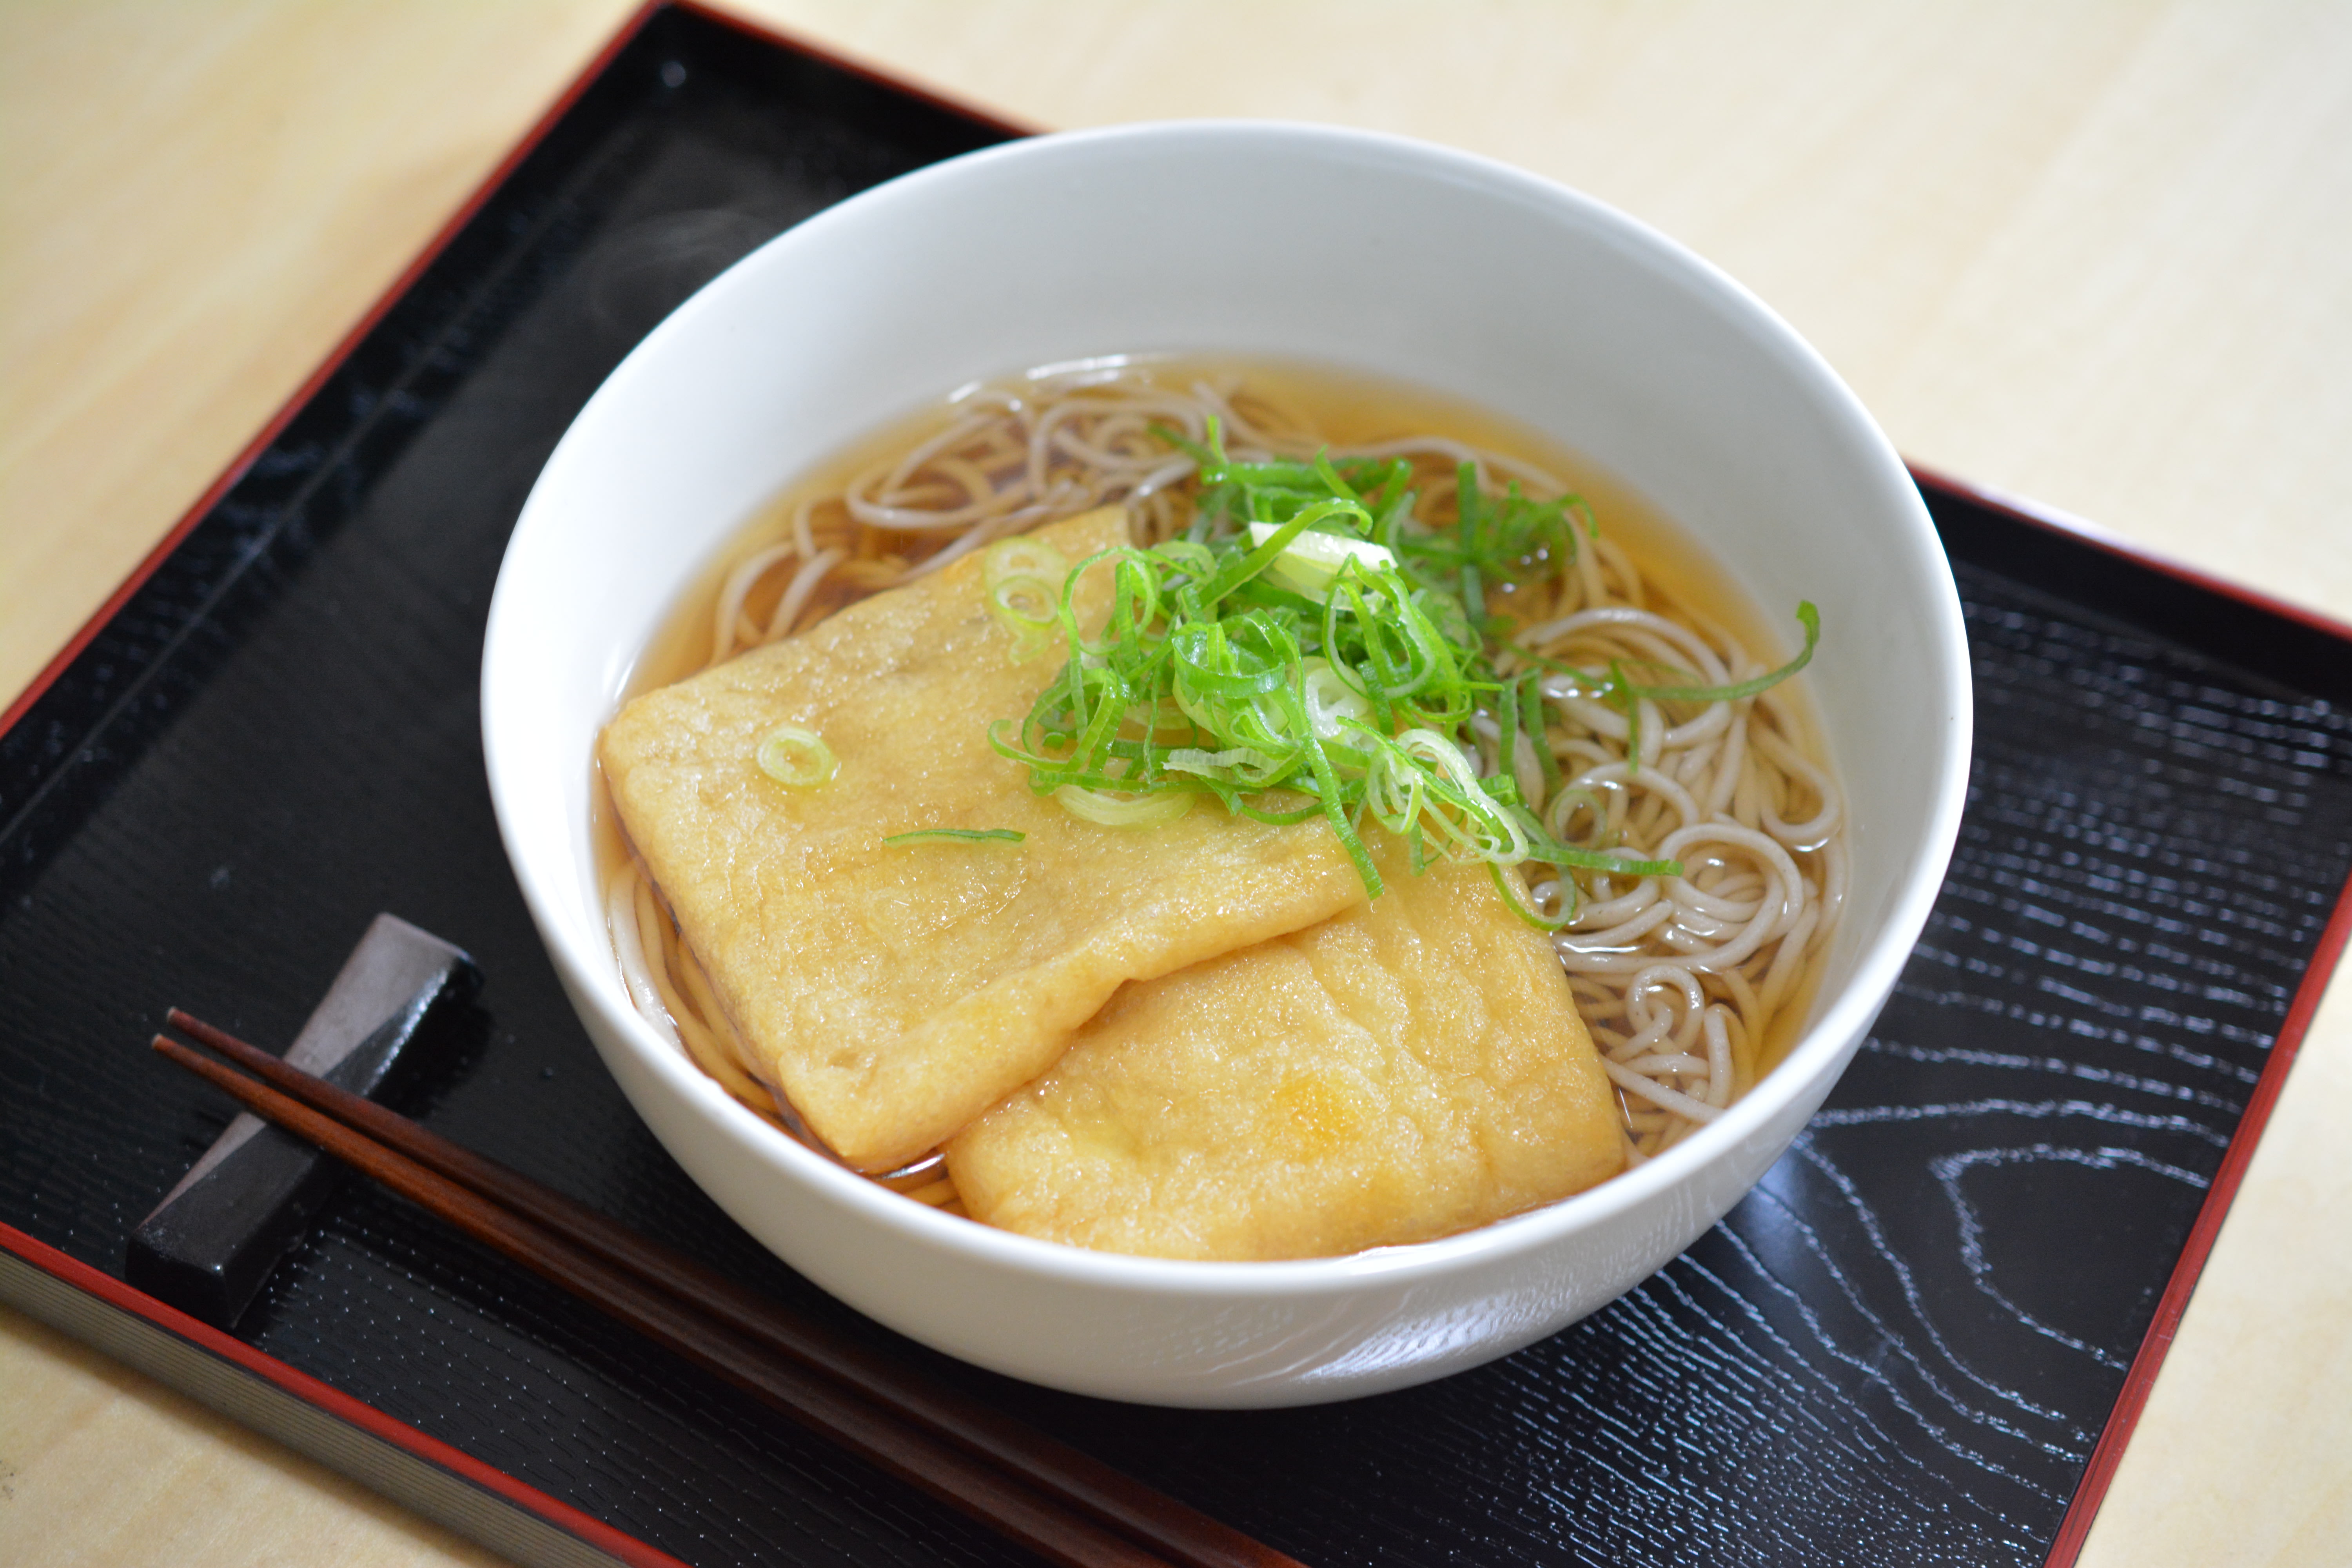 A bowl of soba (buckwheat) noodles in a bowl, topped with fried tofu skins and chopped scallions.